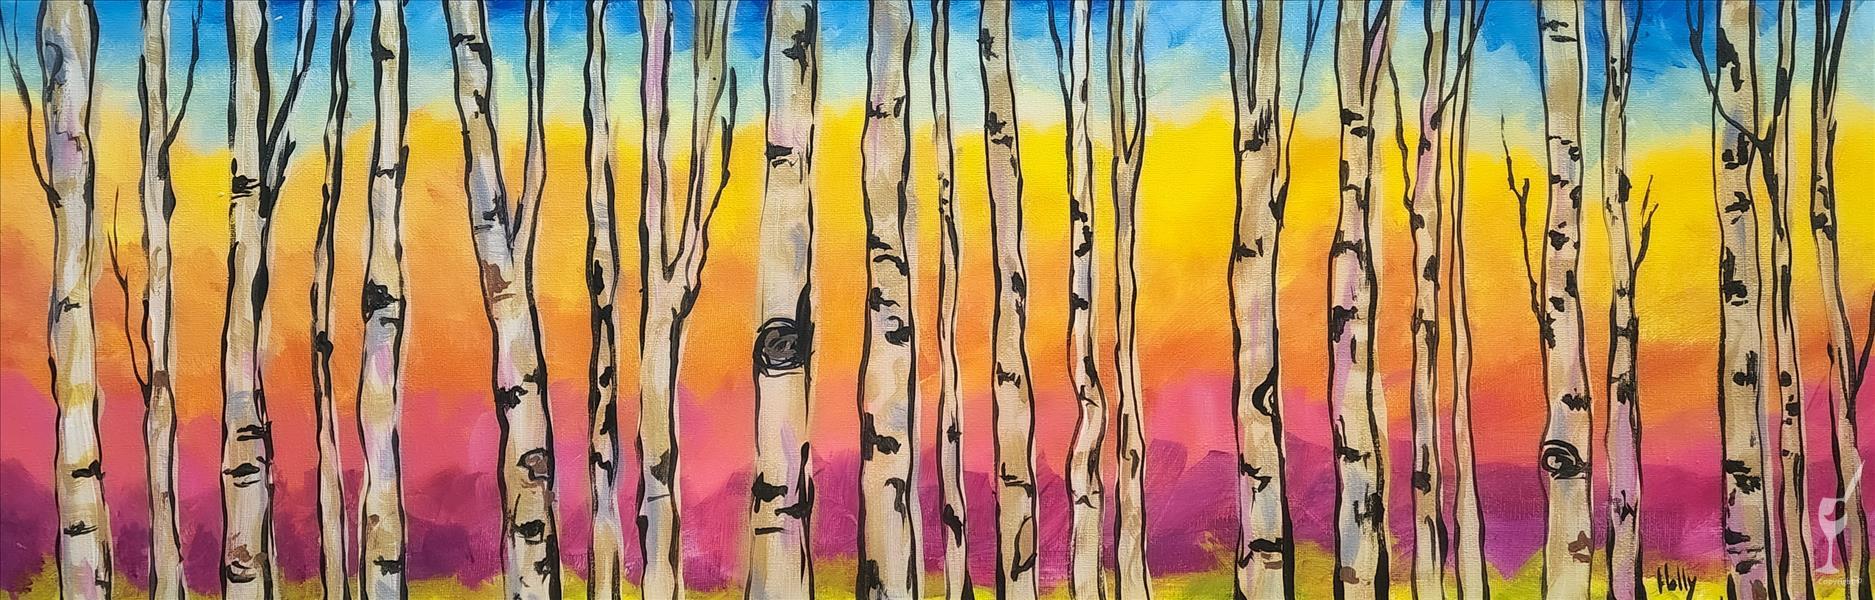 NEW! Vibrant Birch Forest